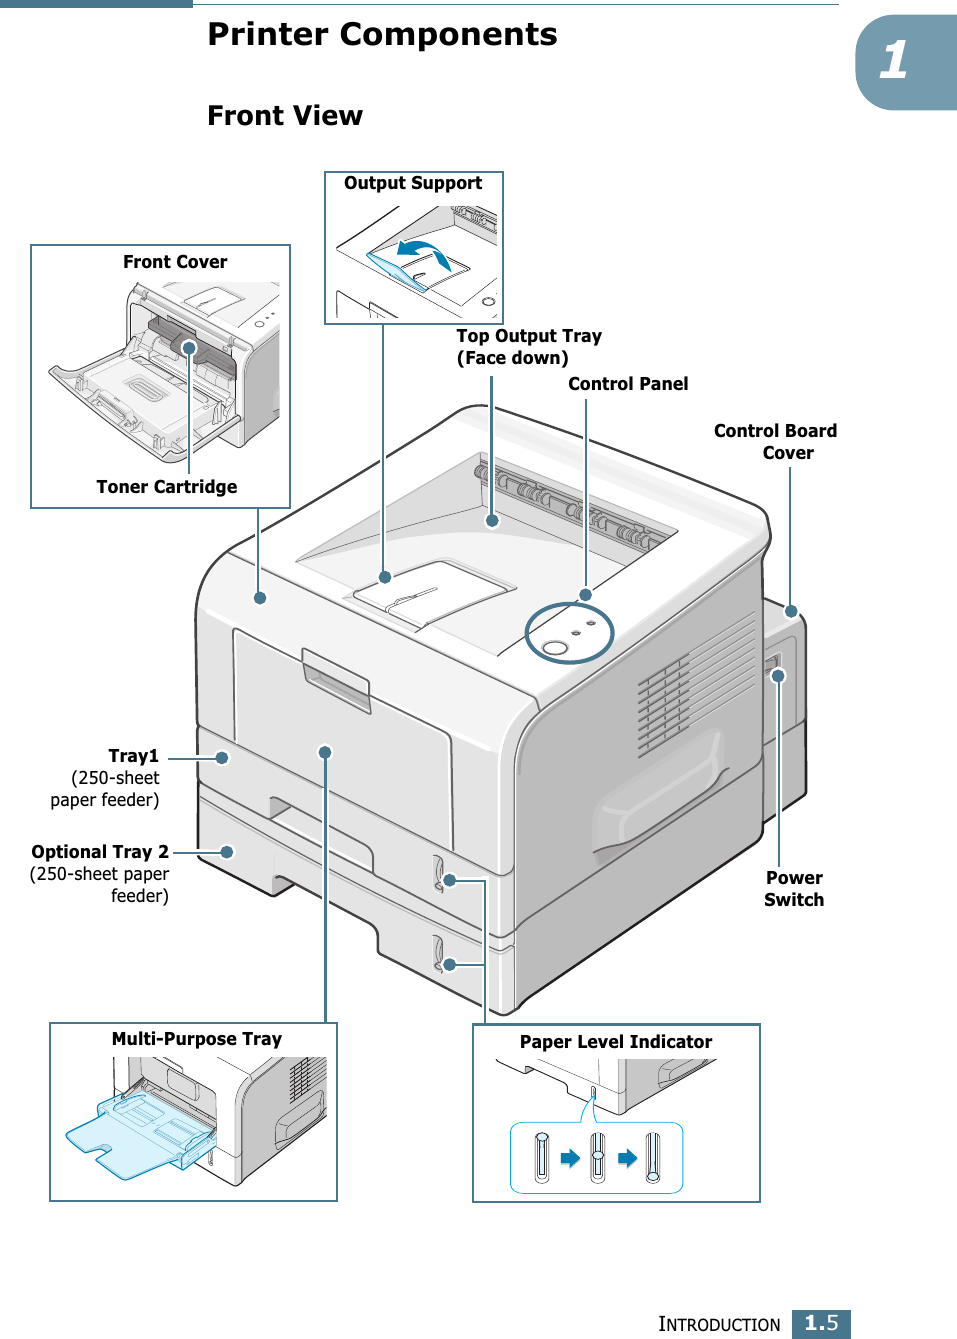 INTRODUCTION1.51Printer ComponentsFront ViewTop Output Tray (Face down)Control PanelPower SwitchTray1(250-sheetpaper feeder)Control Board CoverOptional Tray 2(250-sheet paperfeeder)Paper Level IndicatorMulti-Purpose TrayFront CoverToner CartridgeOutput Support